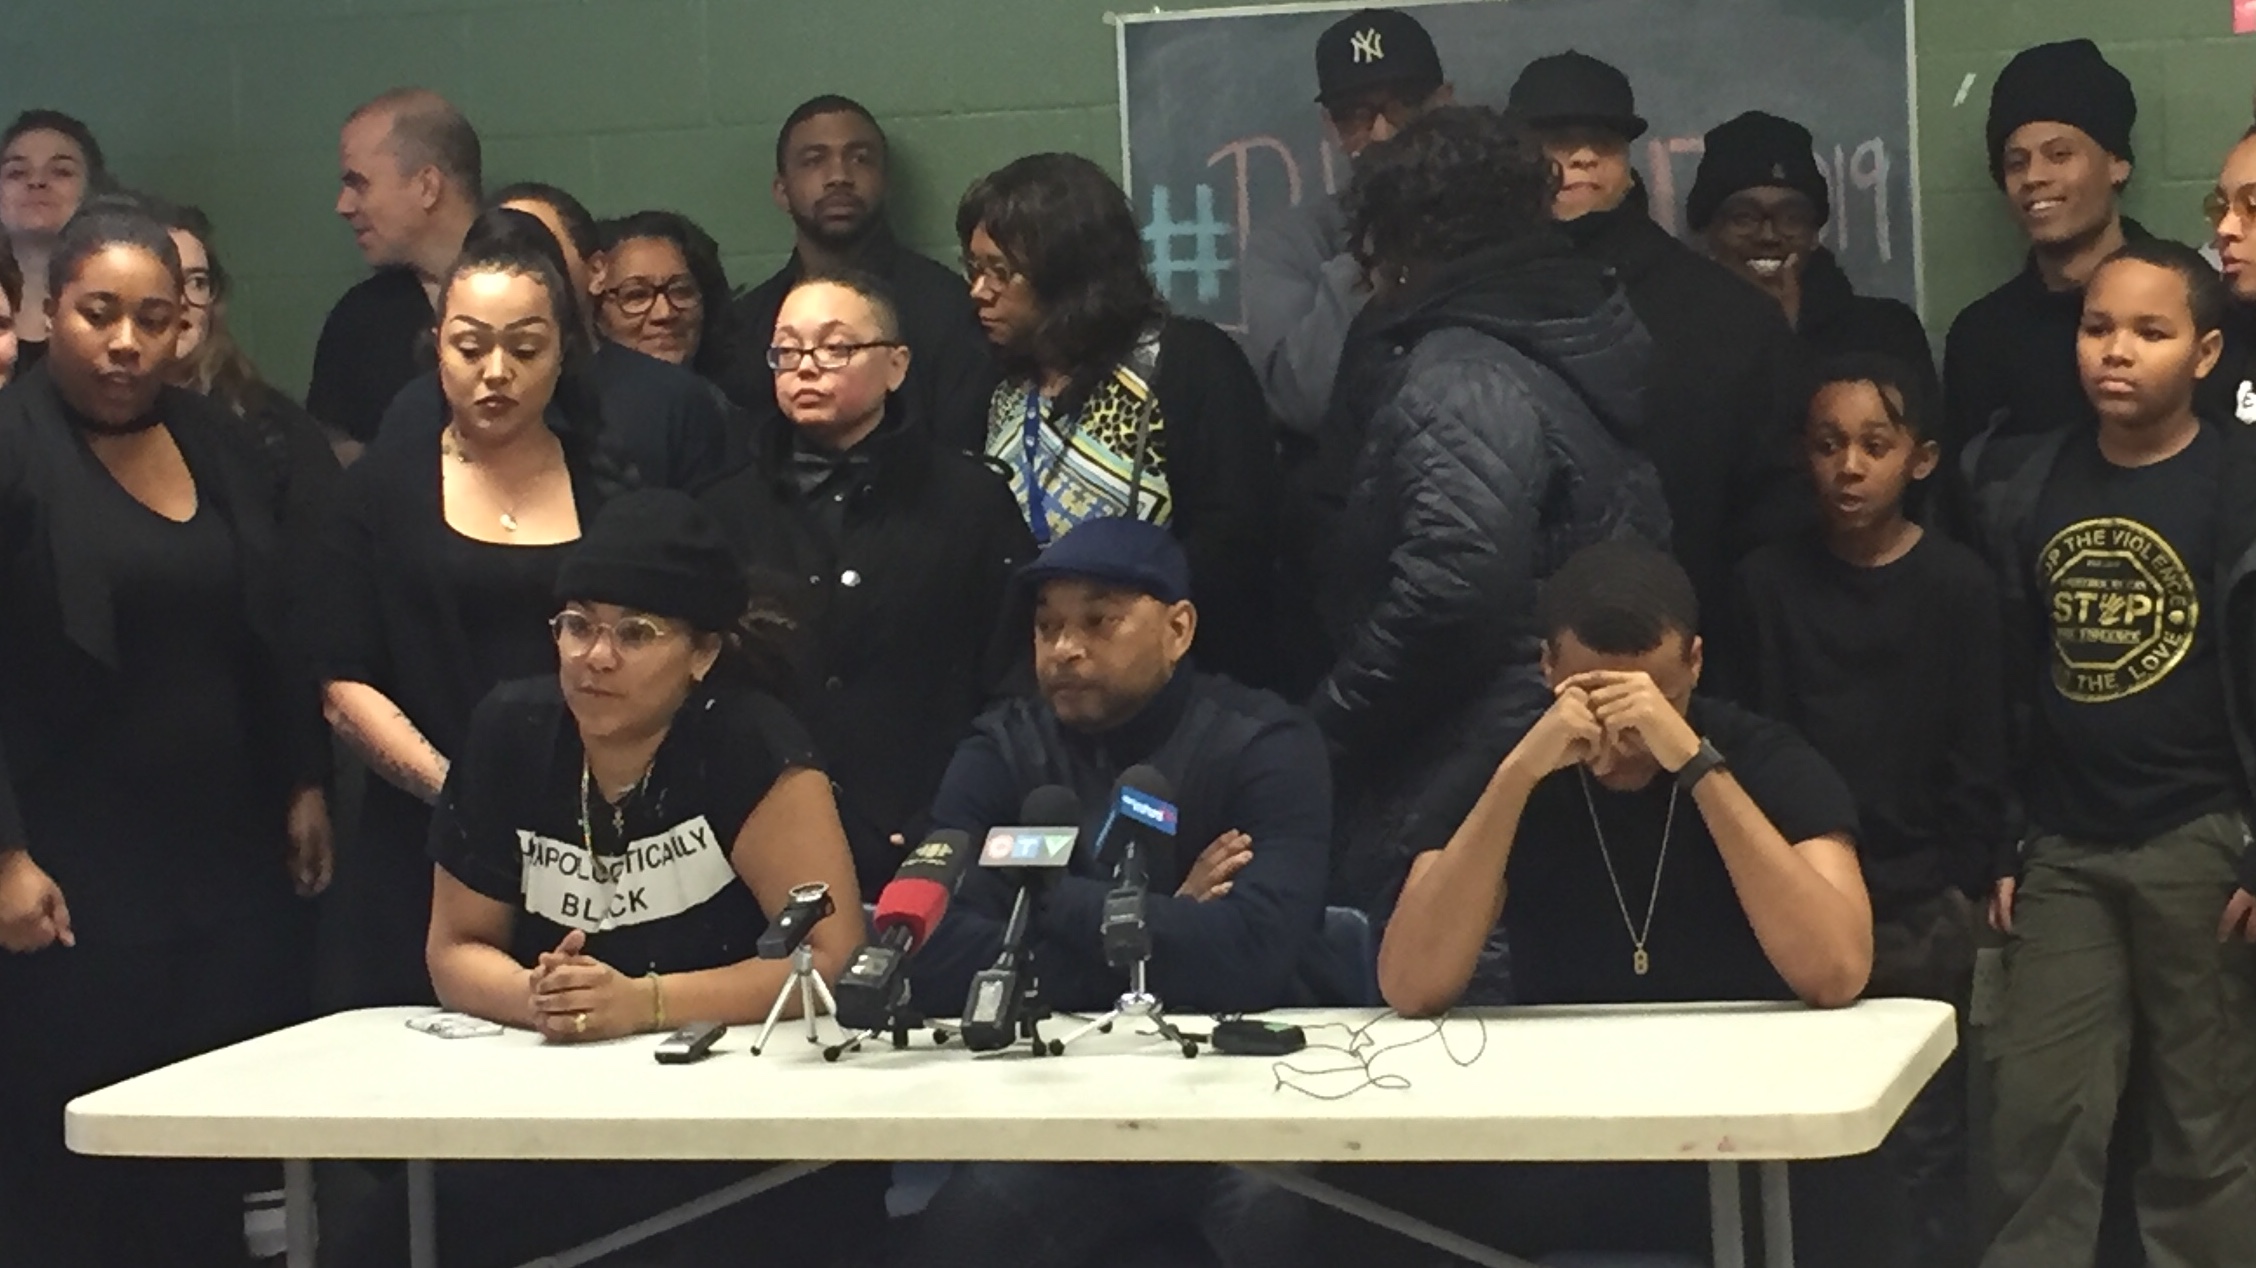 News Conference on Racial Profiling